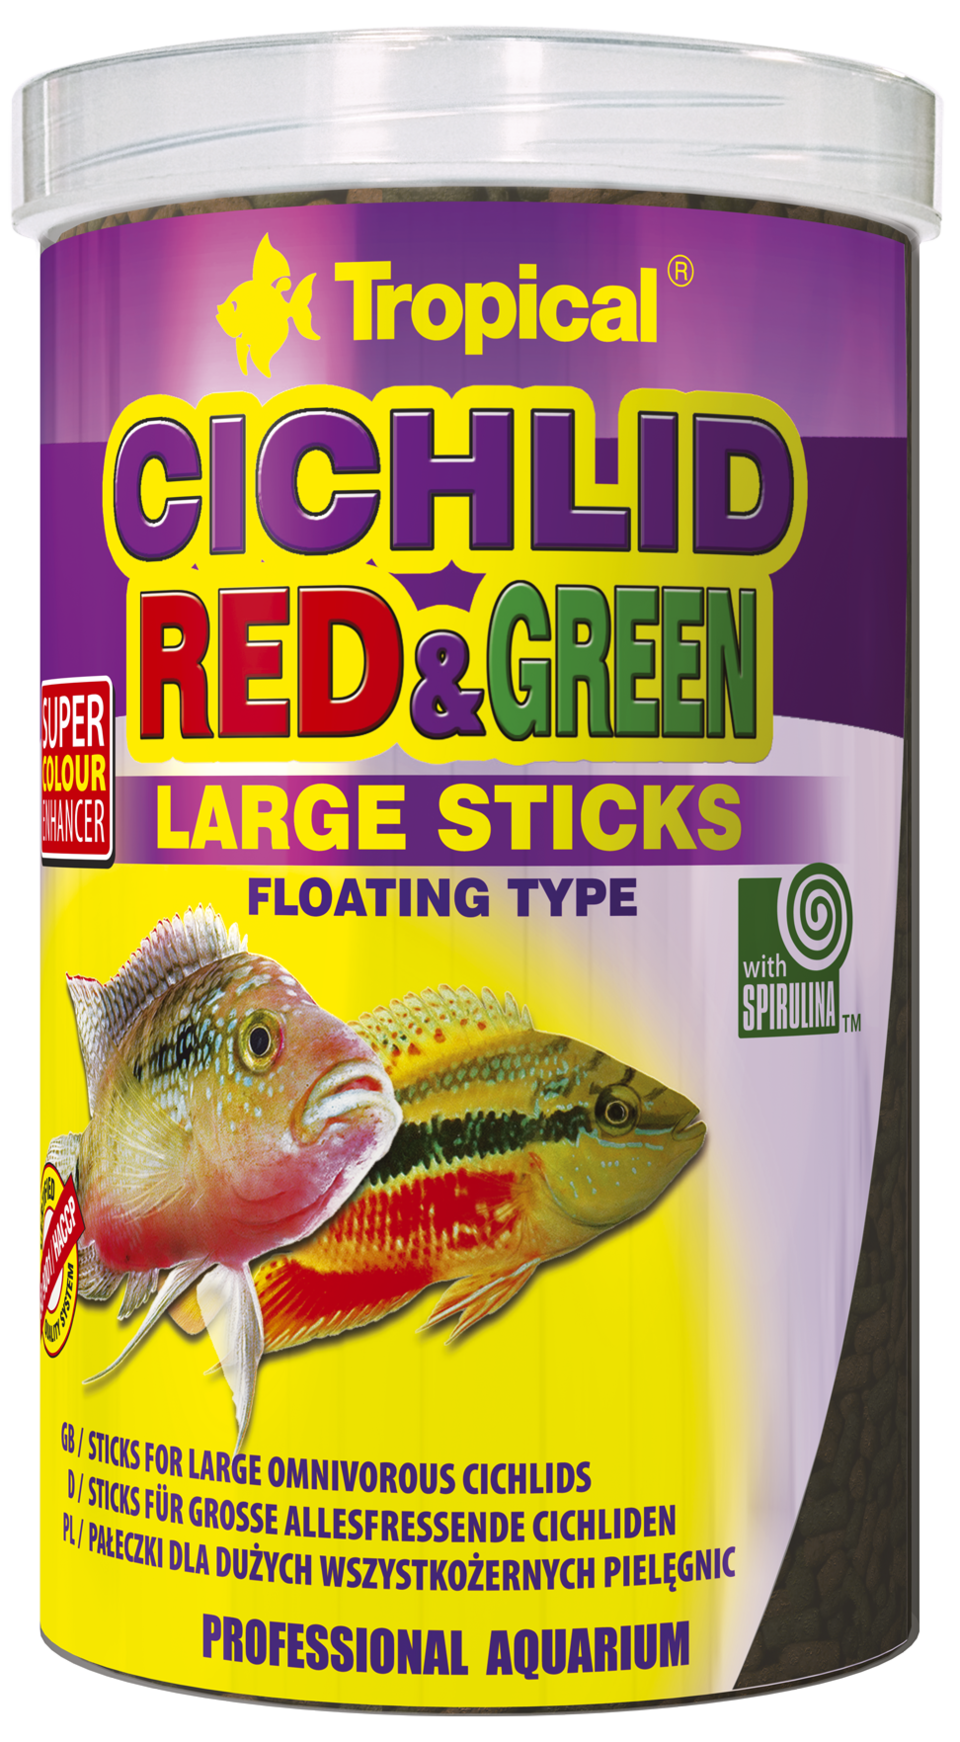 csm_cichlid-red-green-large_1000_7434bba8a9